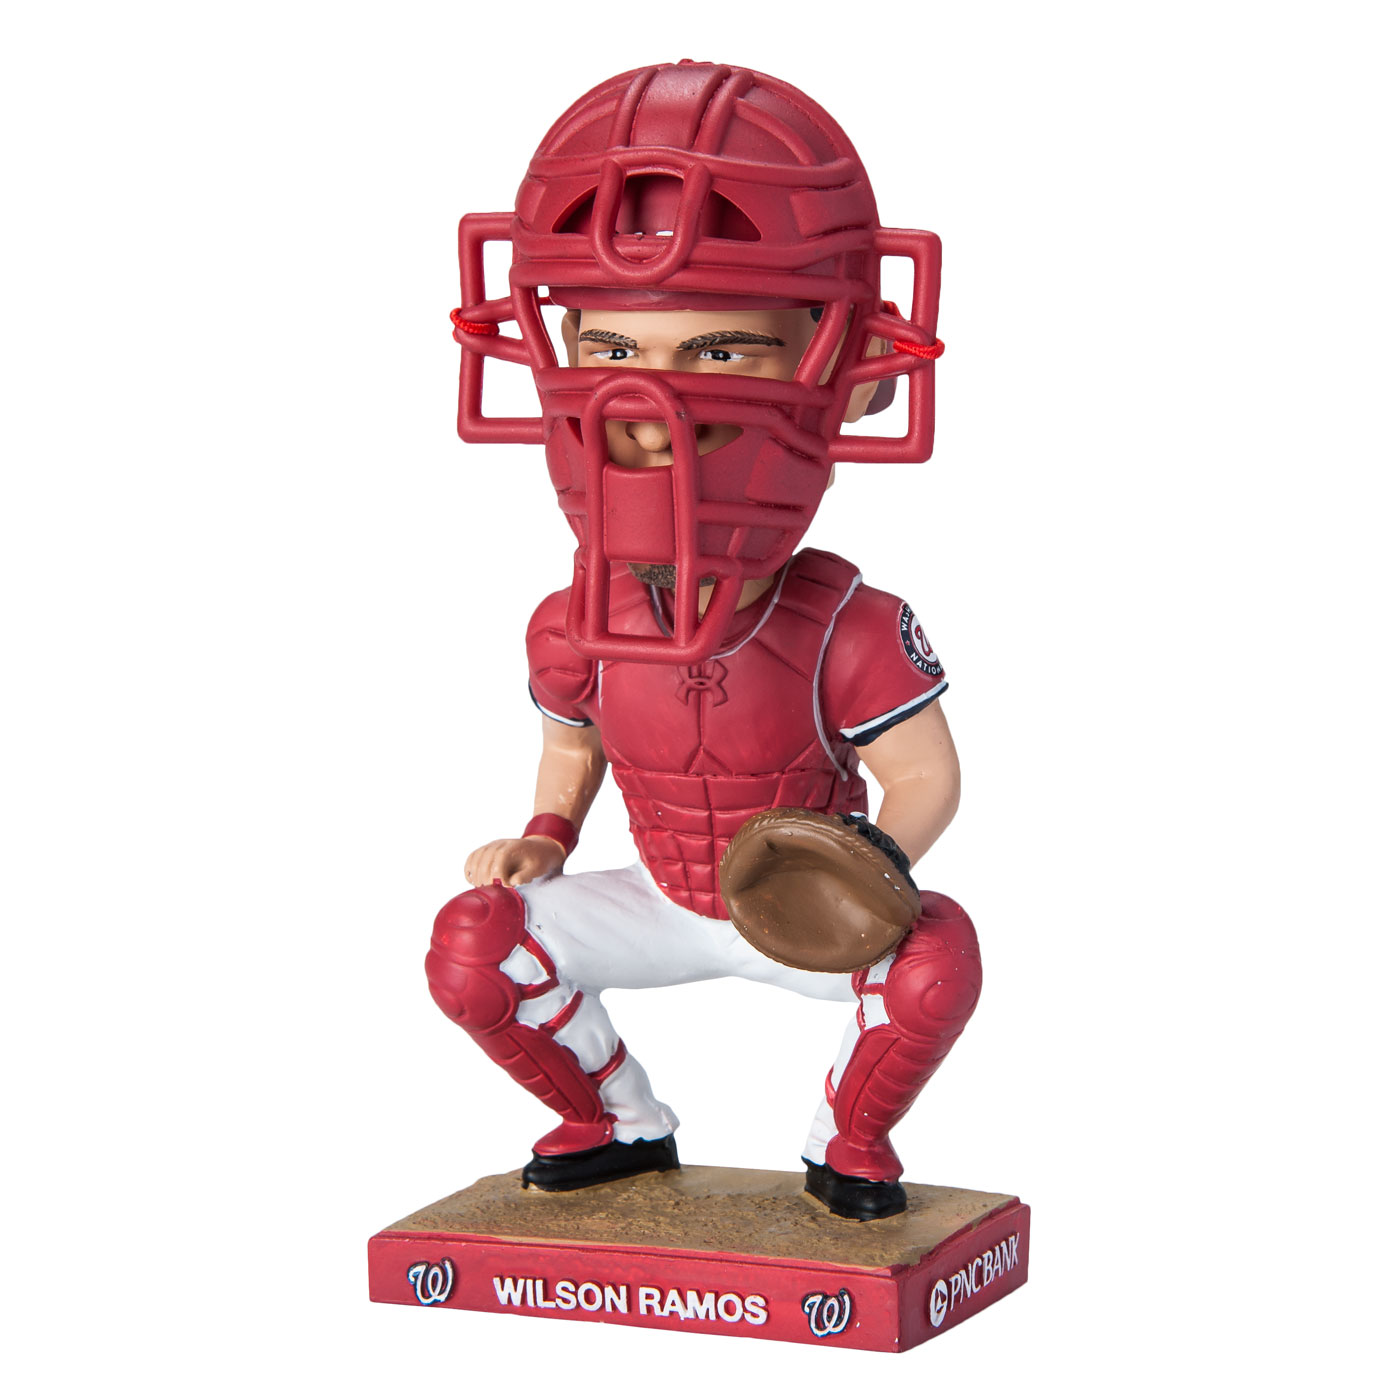 Catcher Bobblehead with Removable Mask